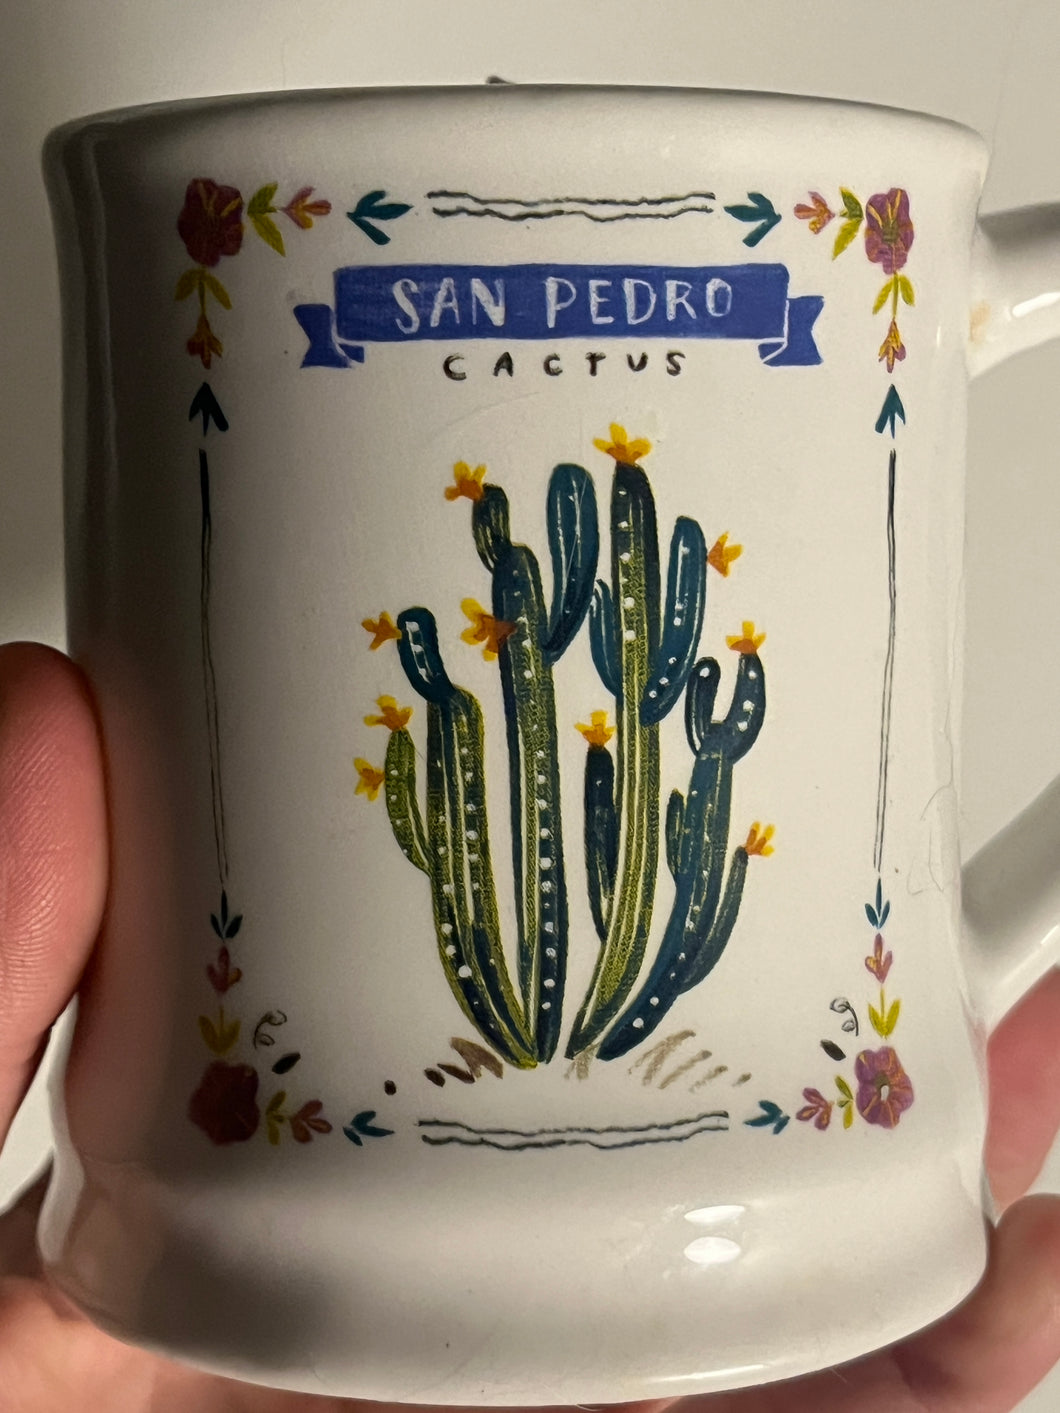 Cactus and Succulent Lovers Dream Soy Mug Candle